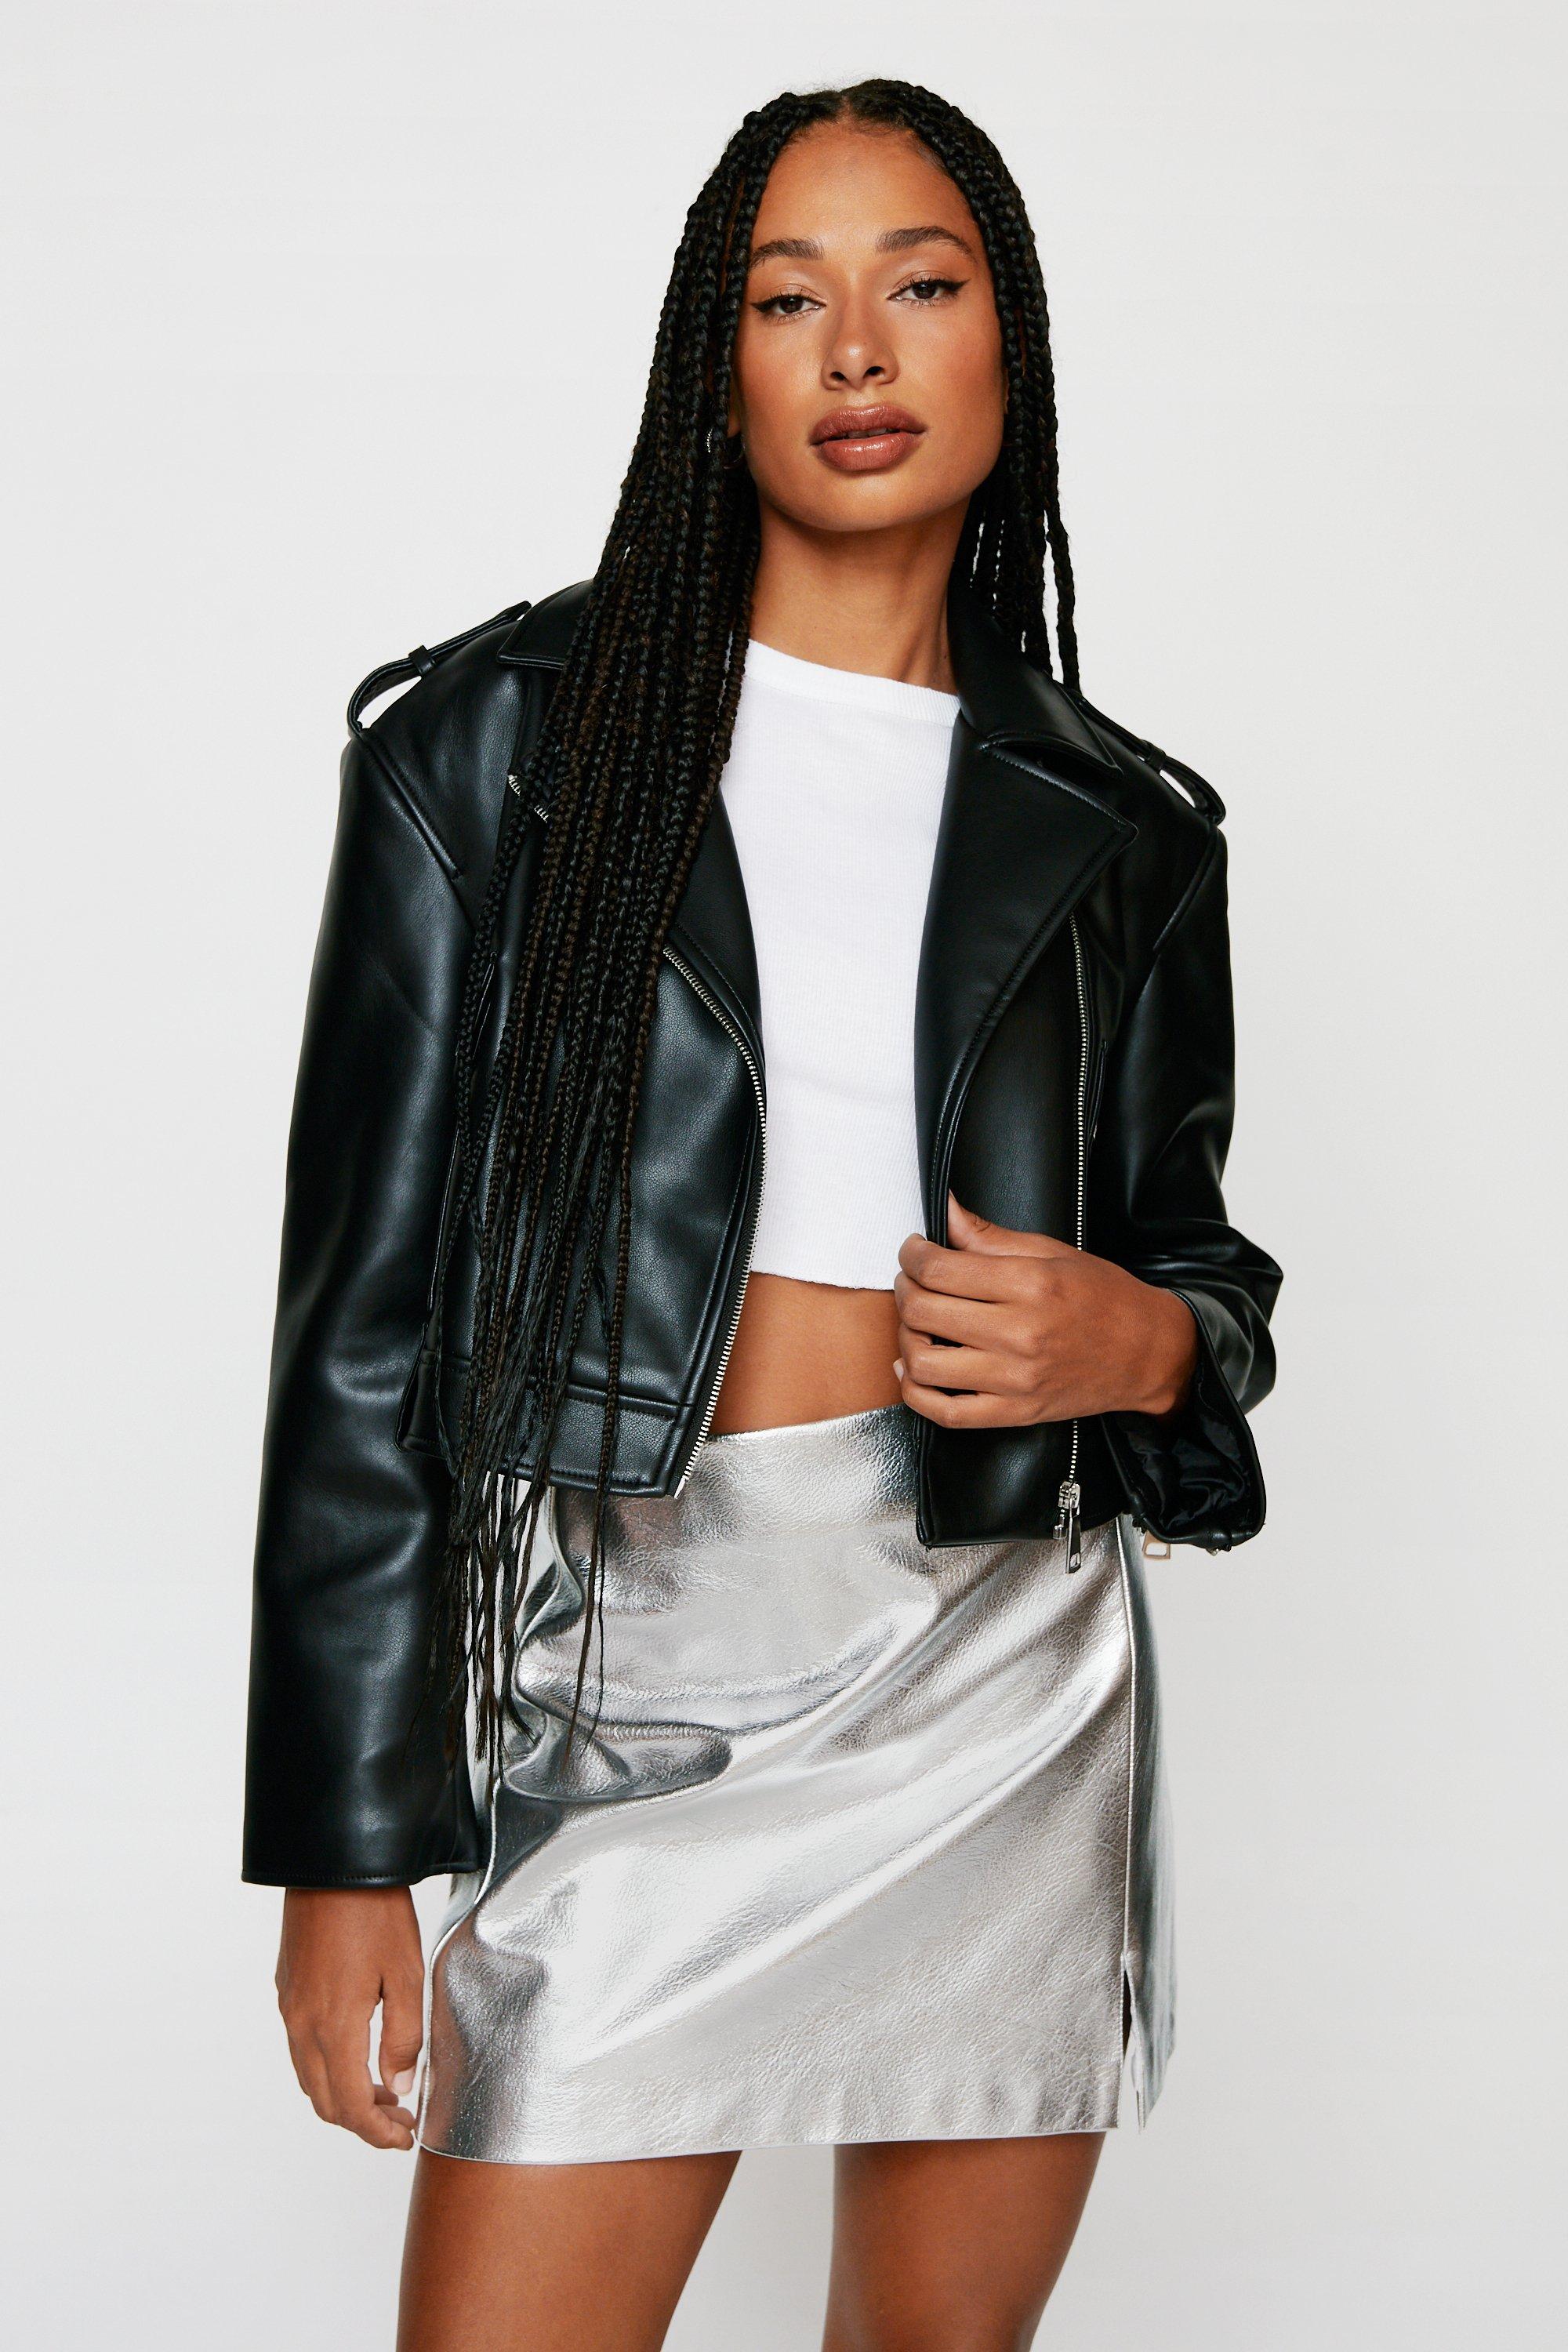 Women's Cropped Leather Jackets | Cropped Faux Leather Jackets